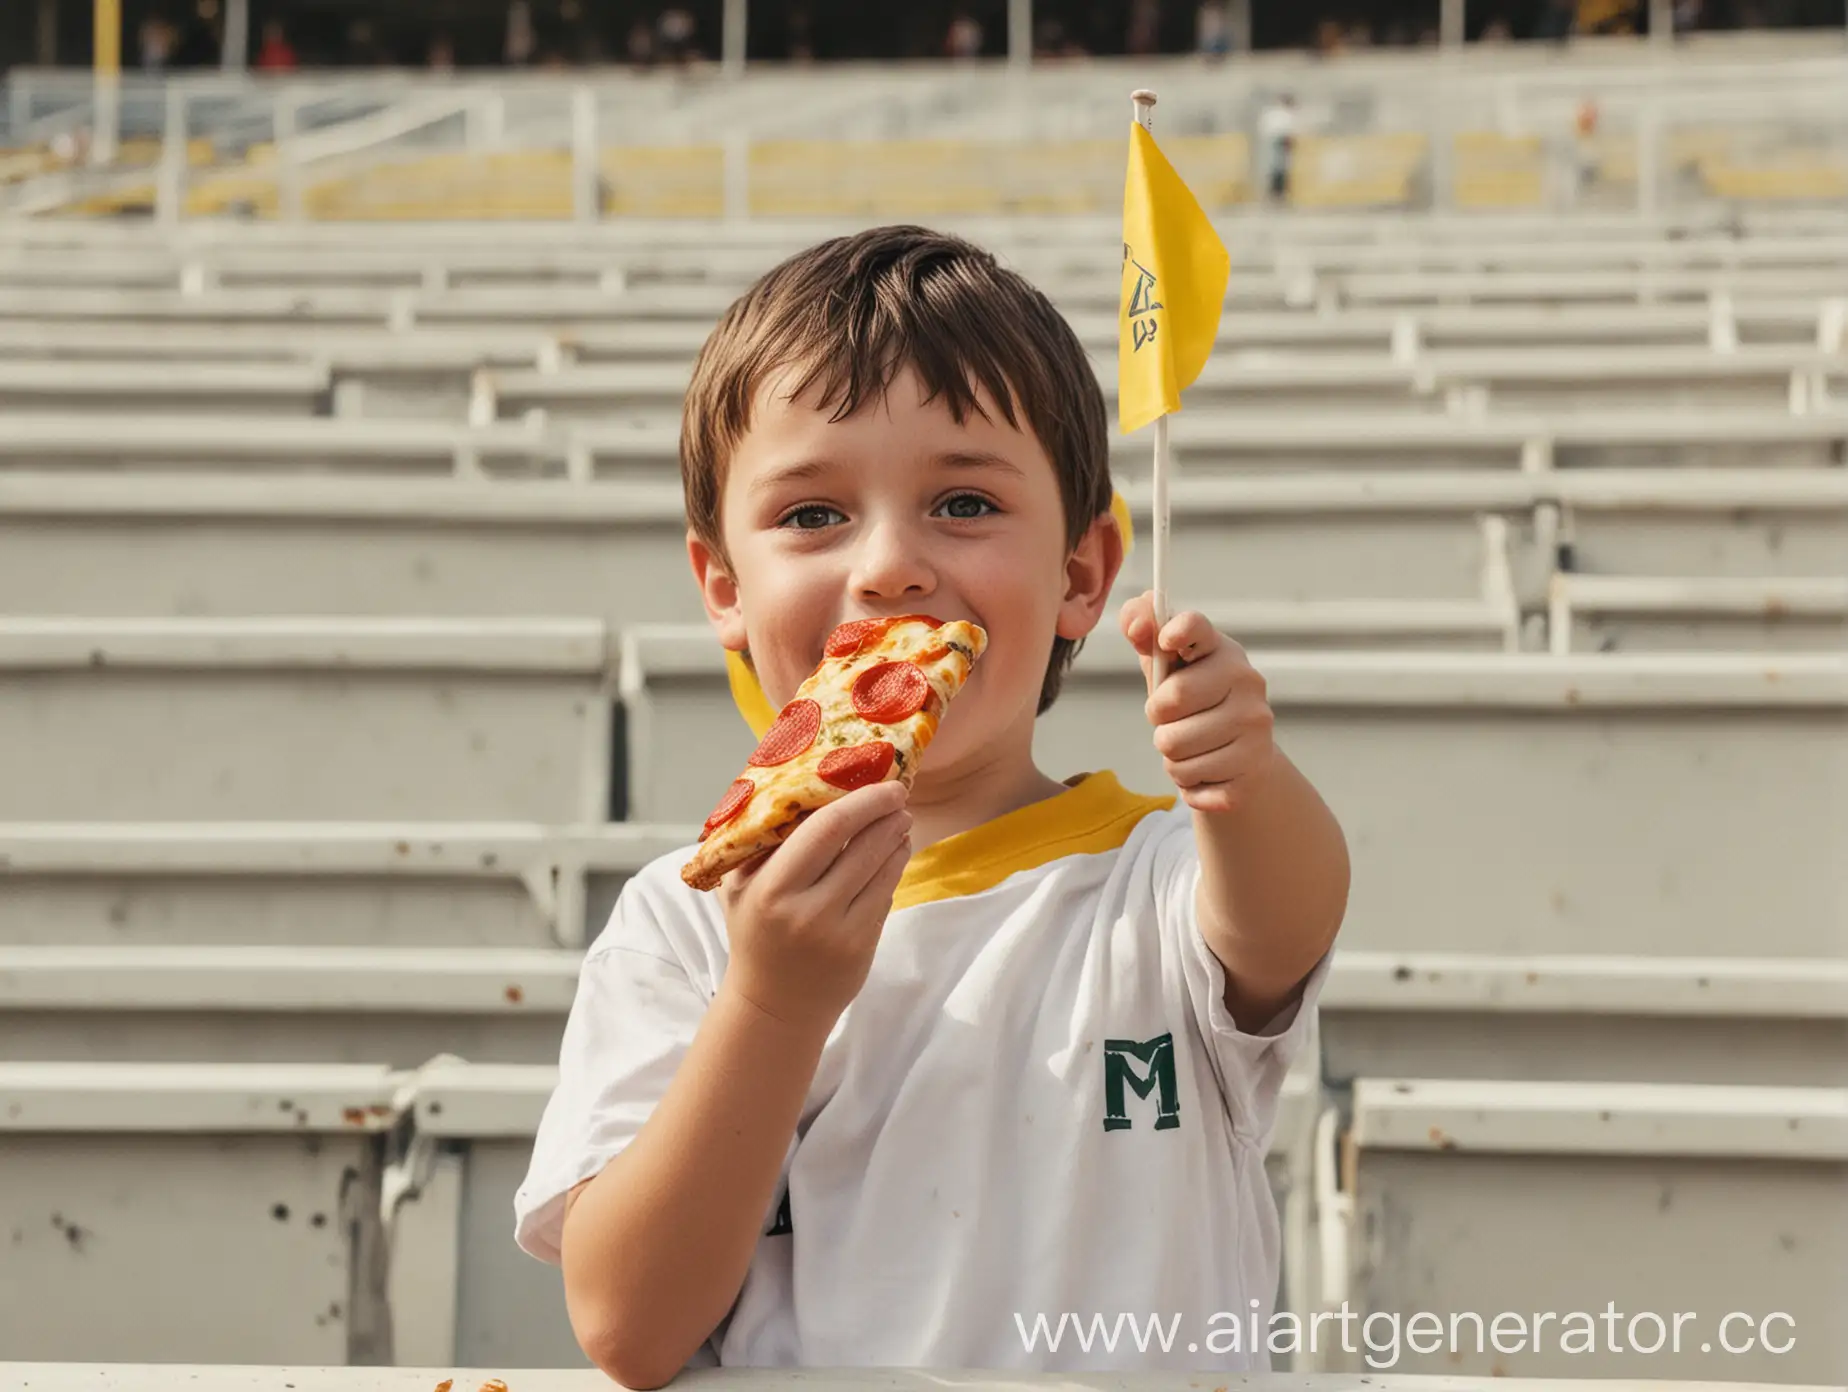 Child-Enjoying-Pizza-at-Sporting-Event-with-Colorful-Flags